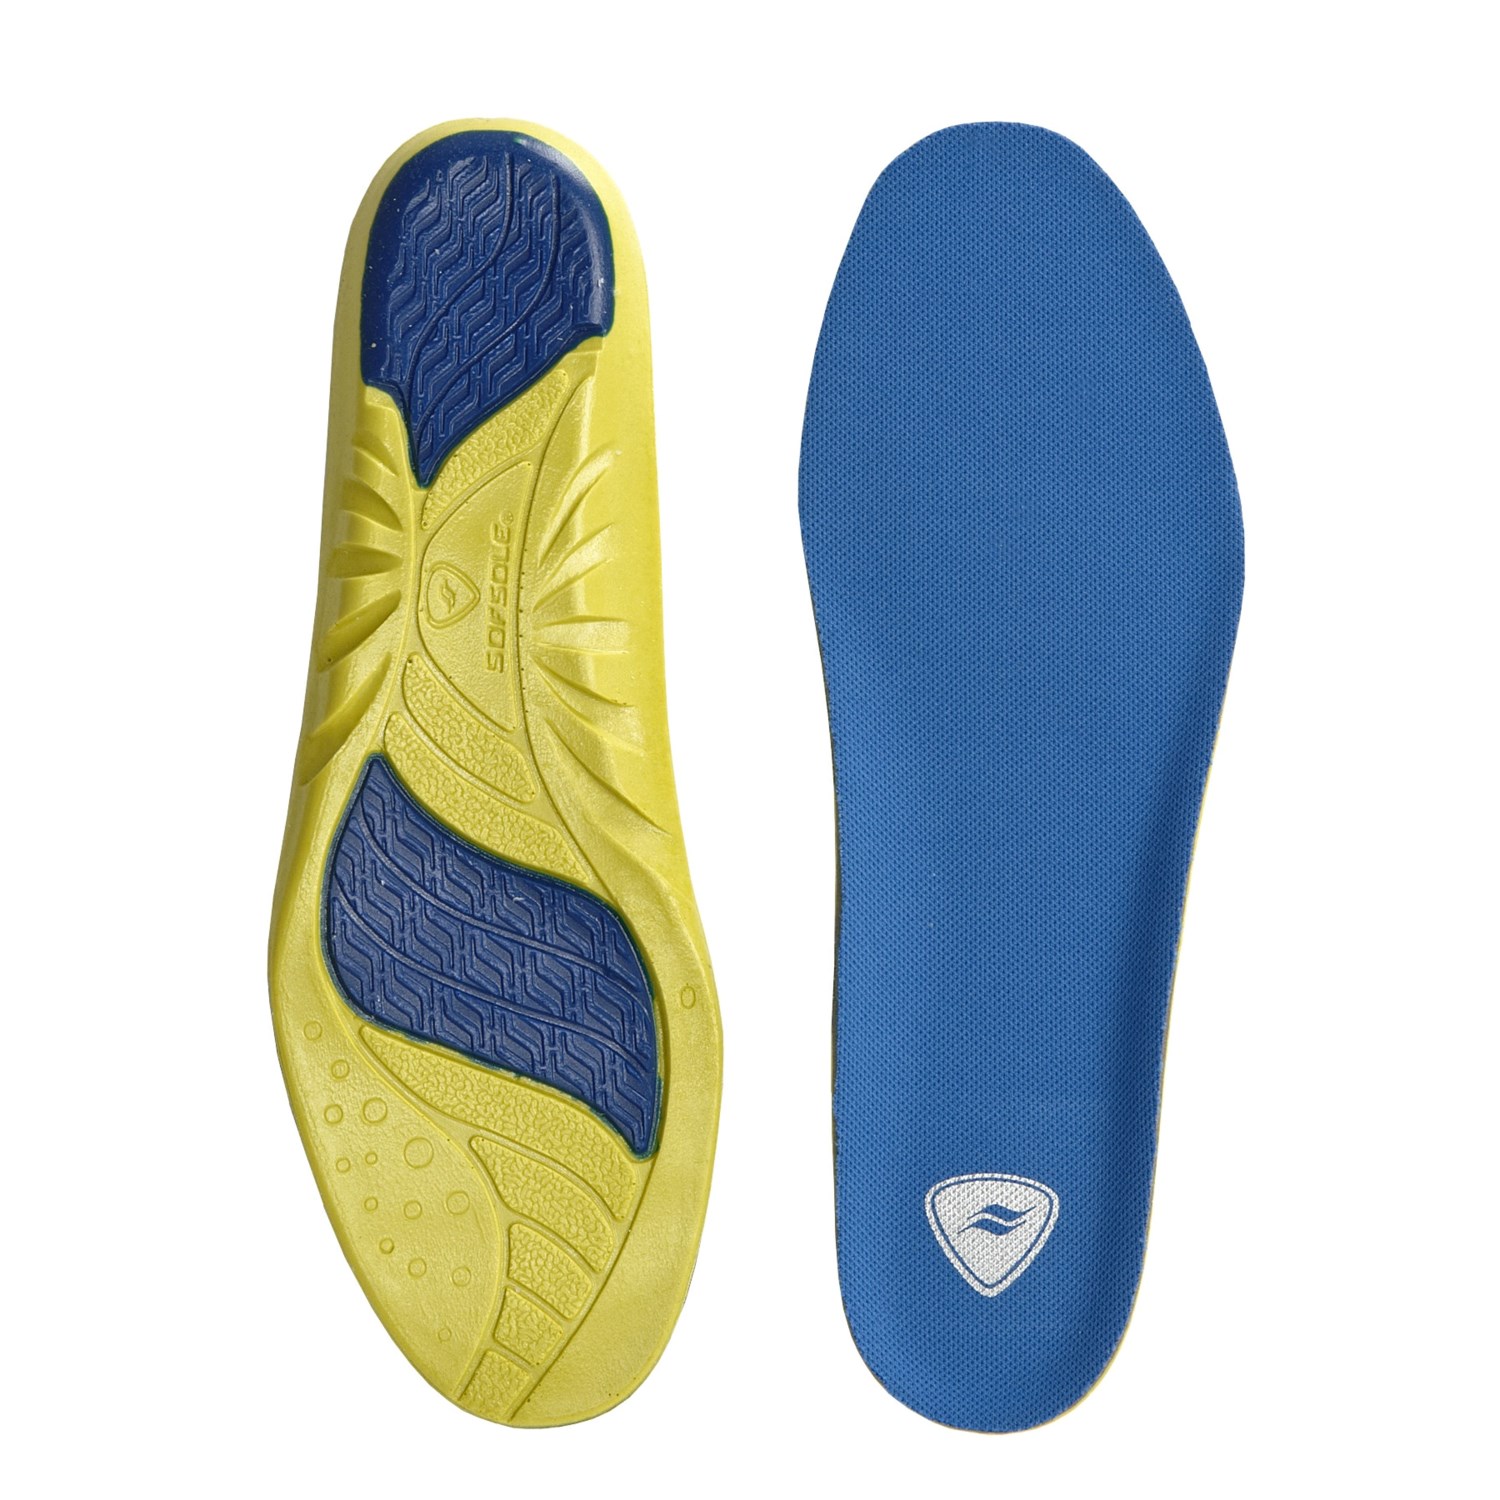 sof-sole-athlete-performance-insoles-for-women-3449w-save-10